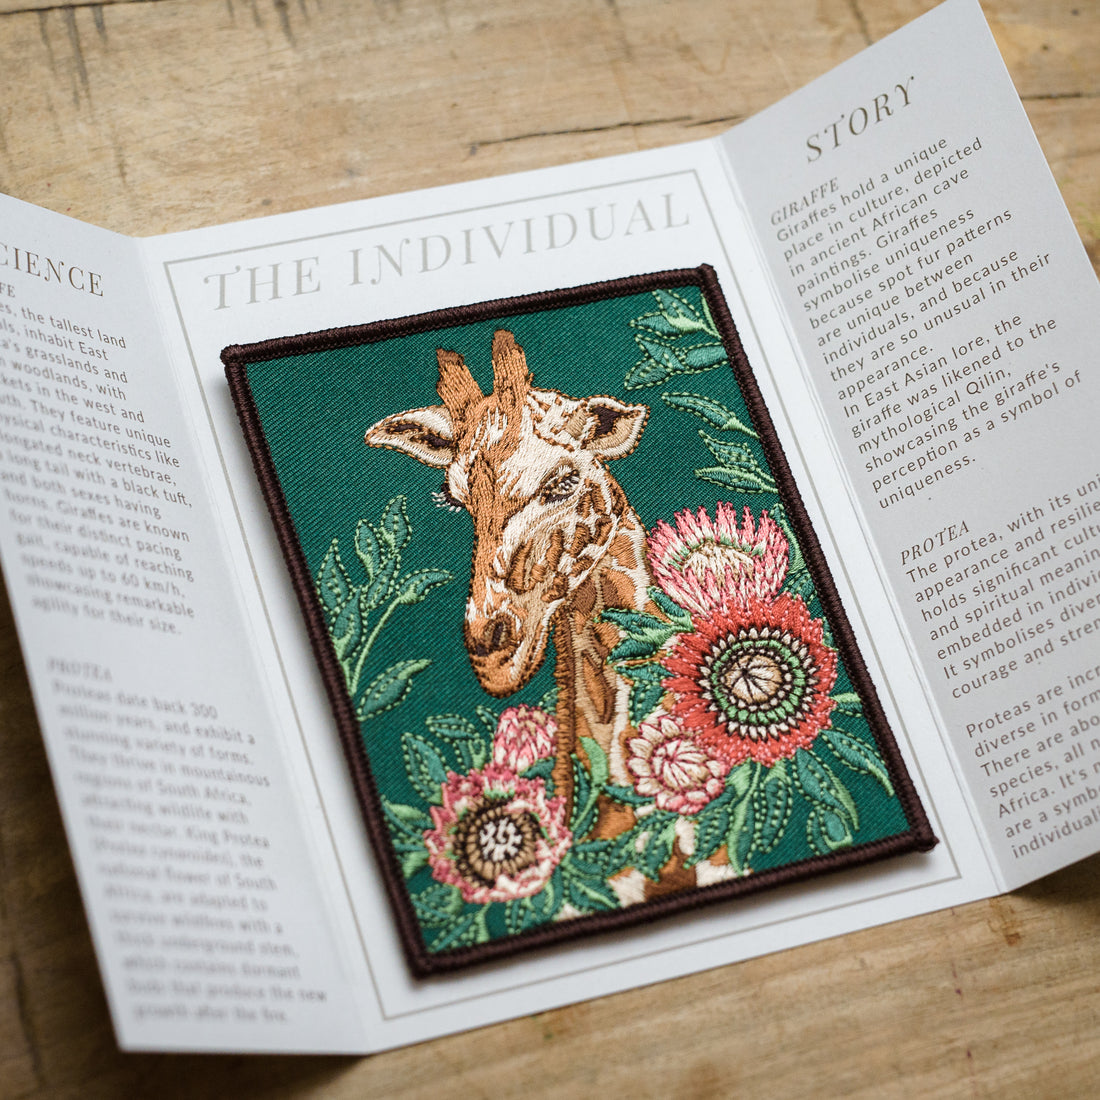 Giraffe and Protea Flower Embroidered Patch in gatefold card with science and story behind the species